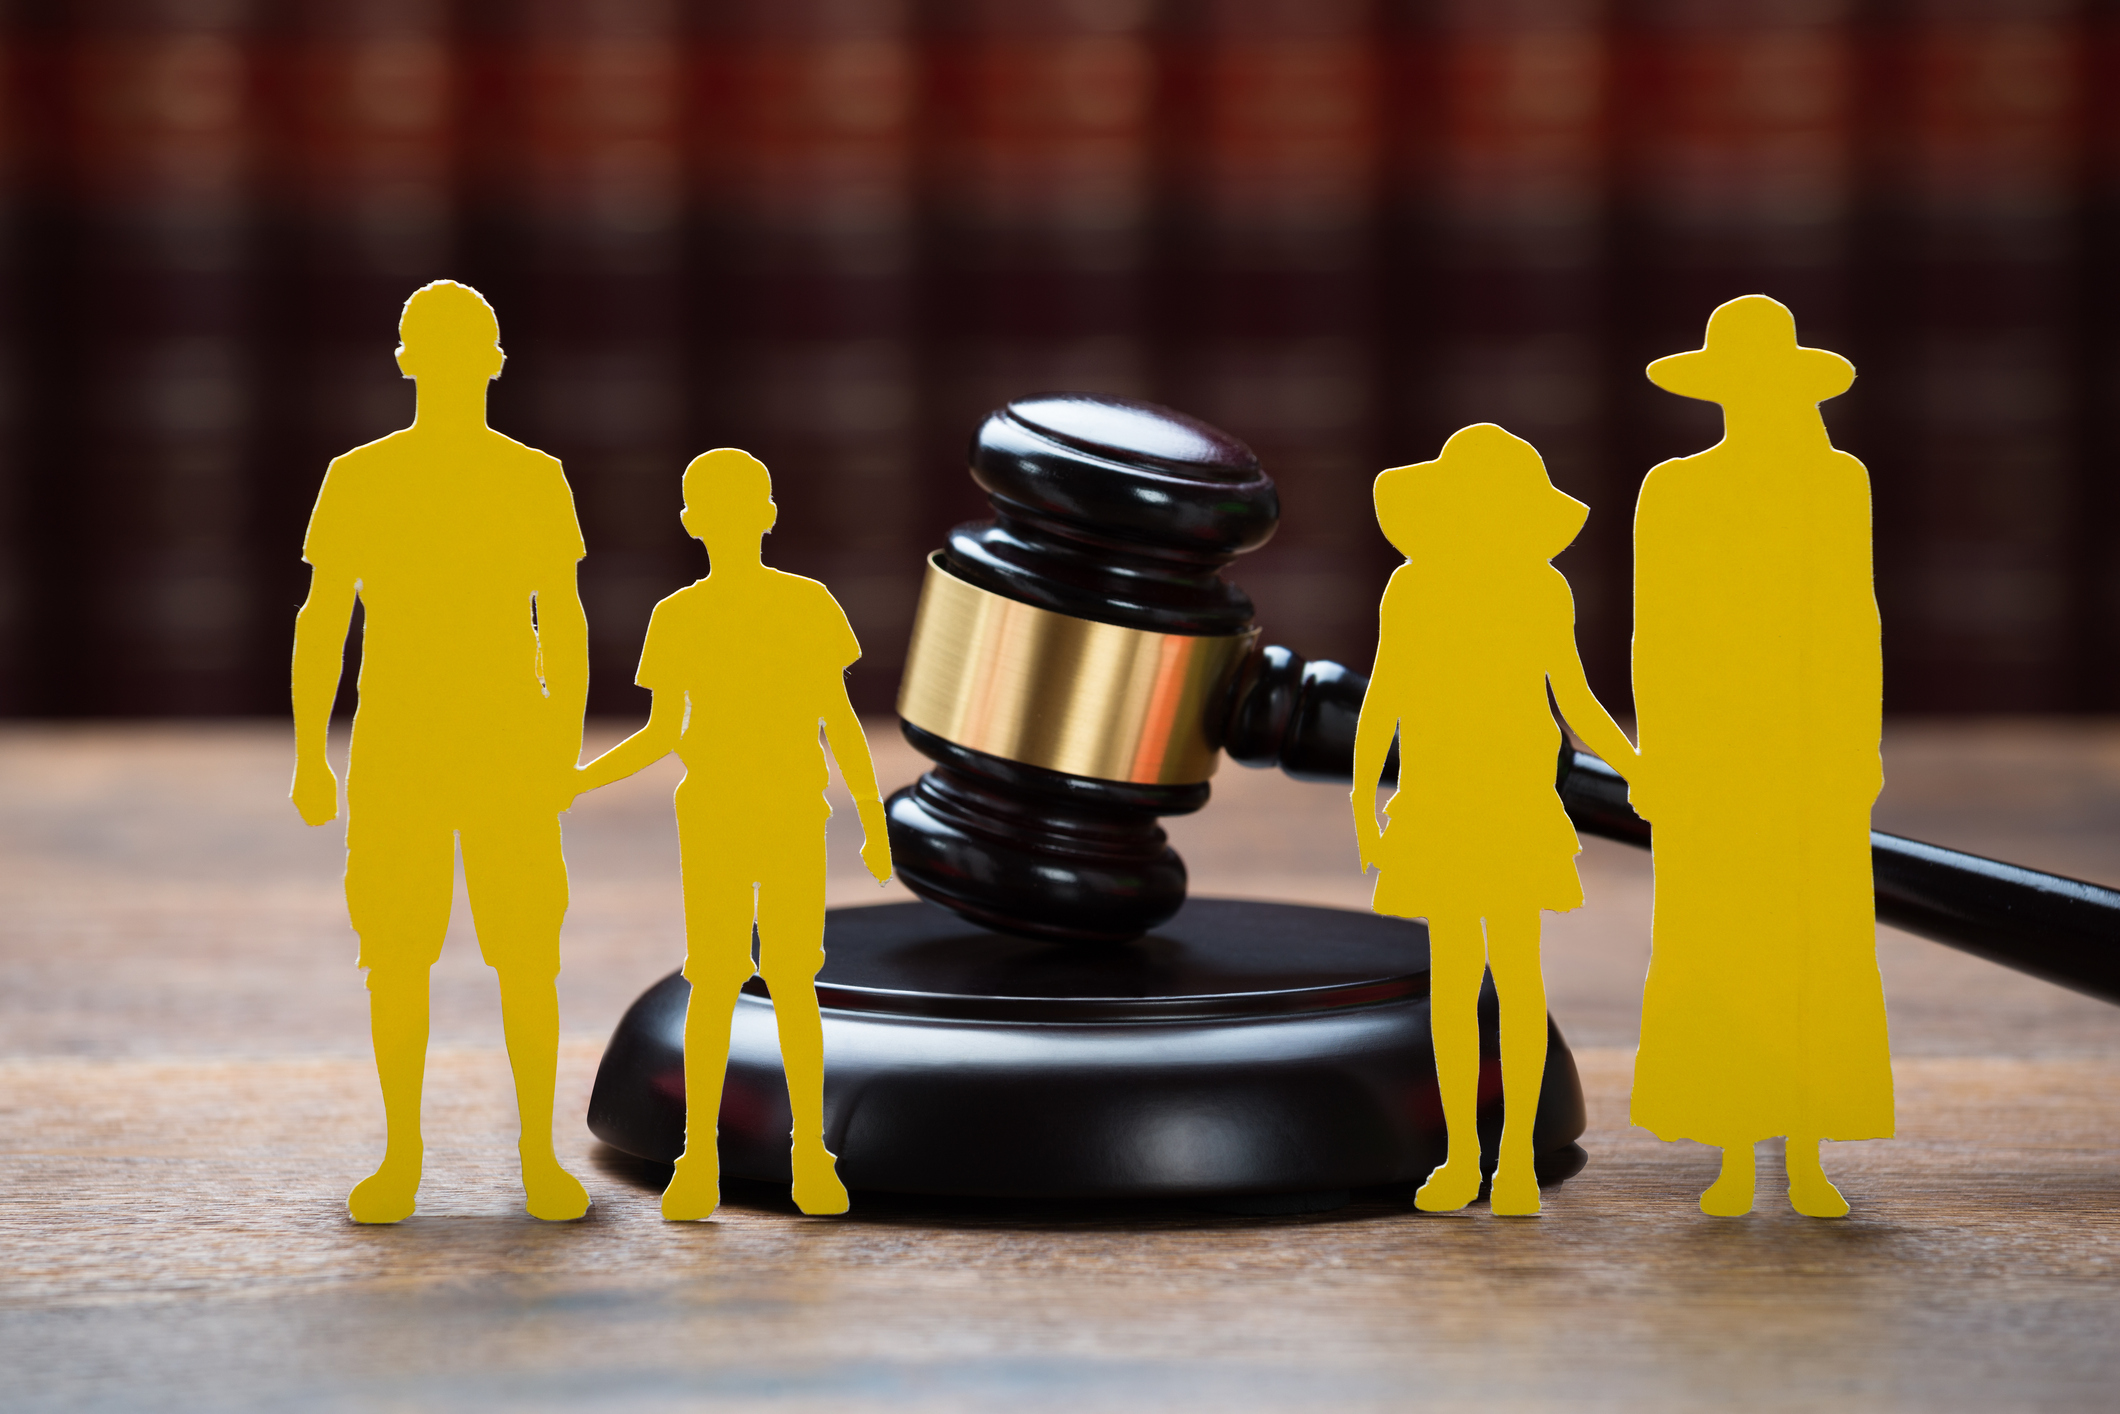 APPEALING THE DECISION ON FAMILY CASES